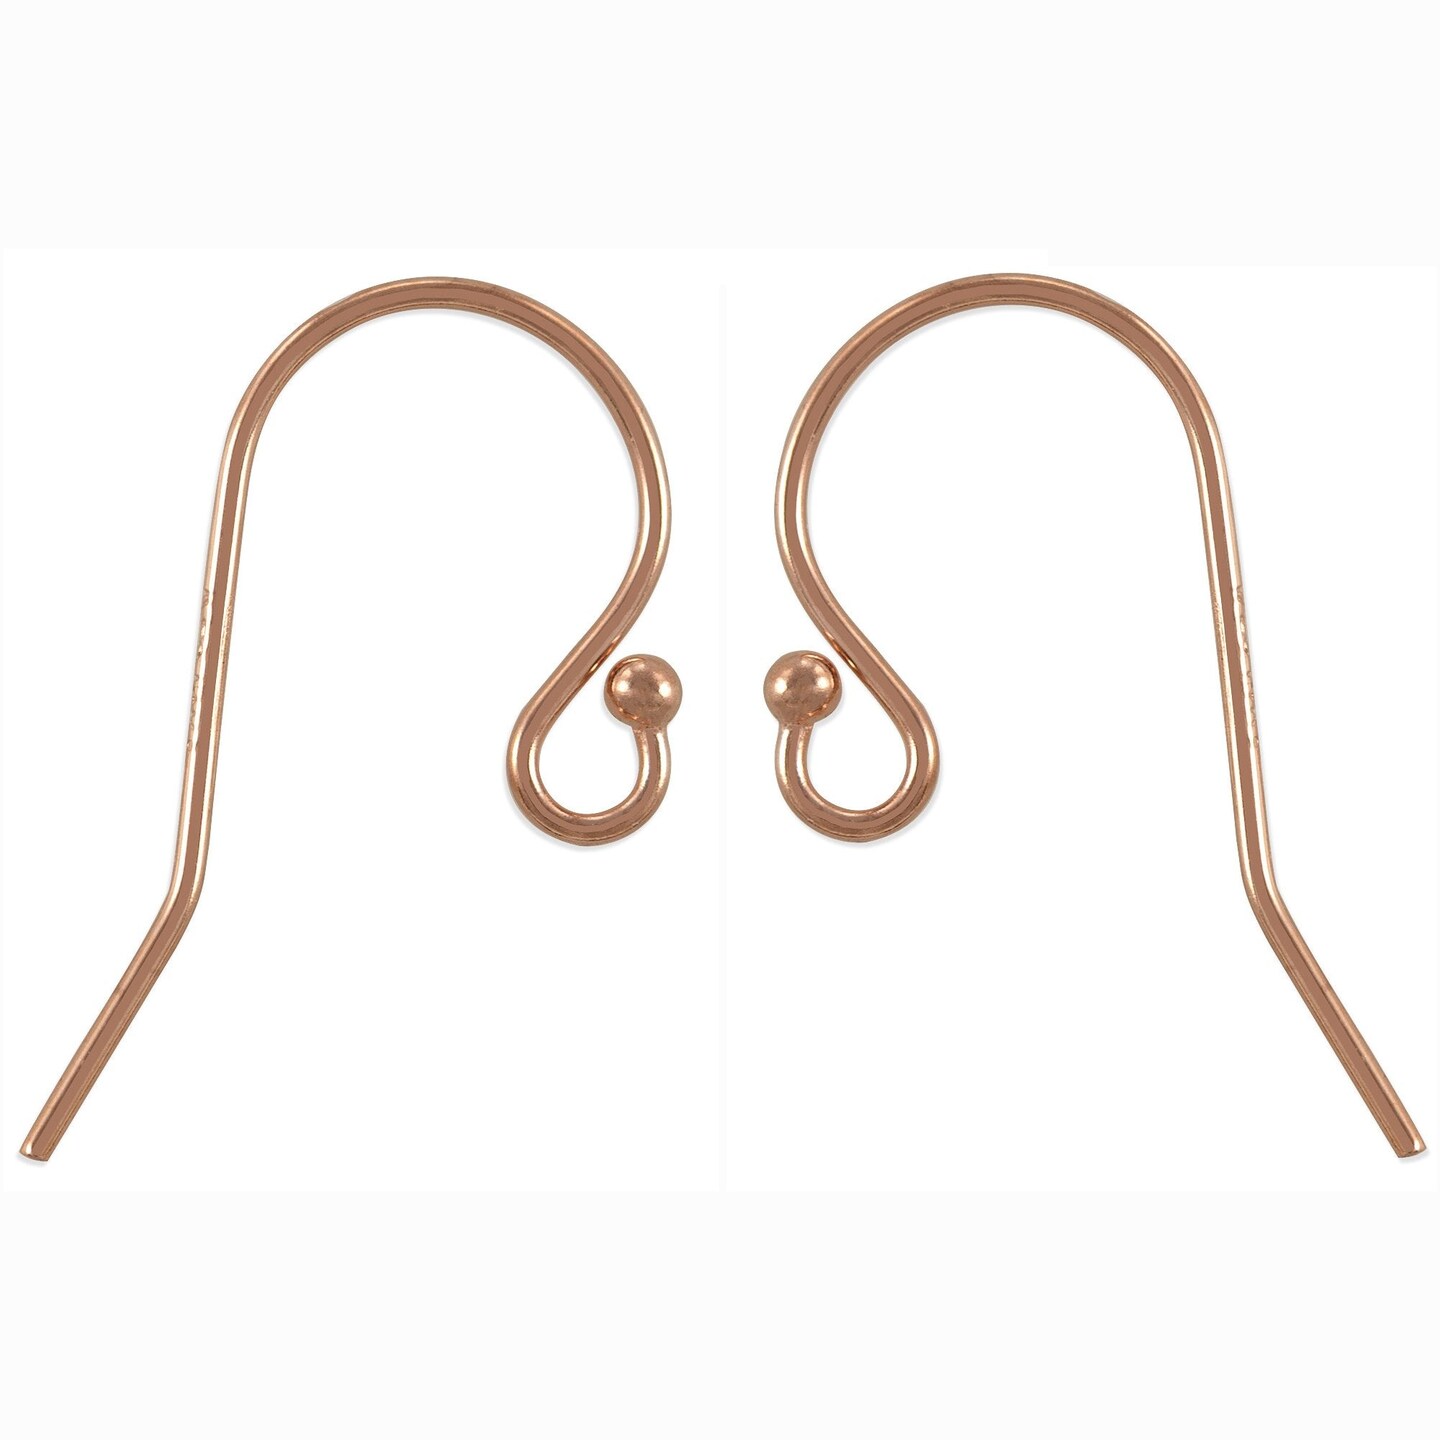 JewelrySupply Rose Gold Filled Earring Wires with Ball End (1 Pair of  Earrings)